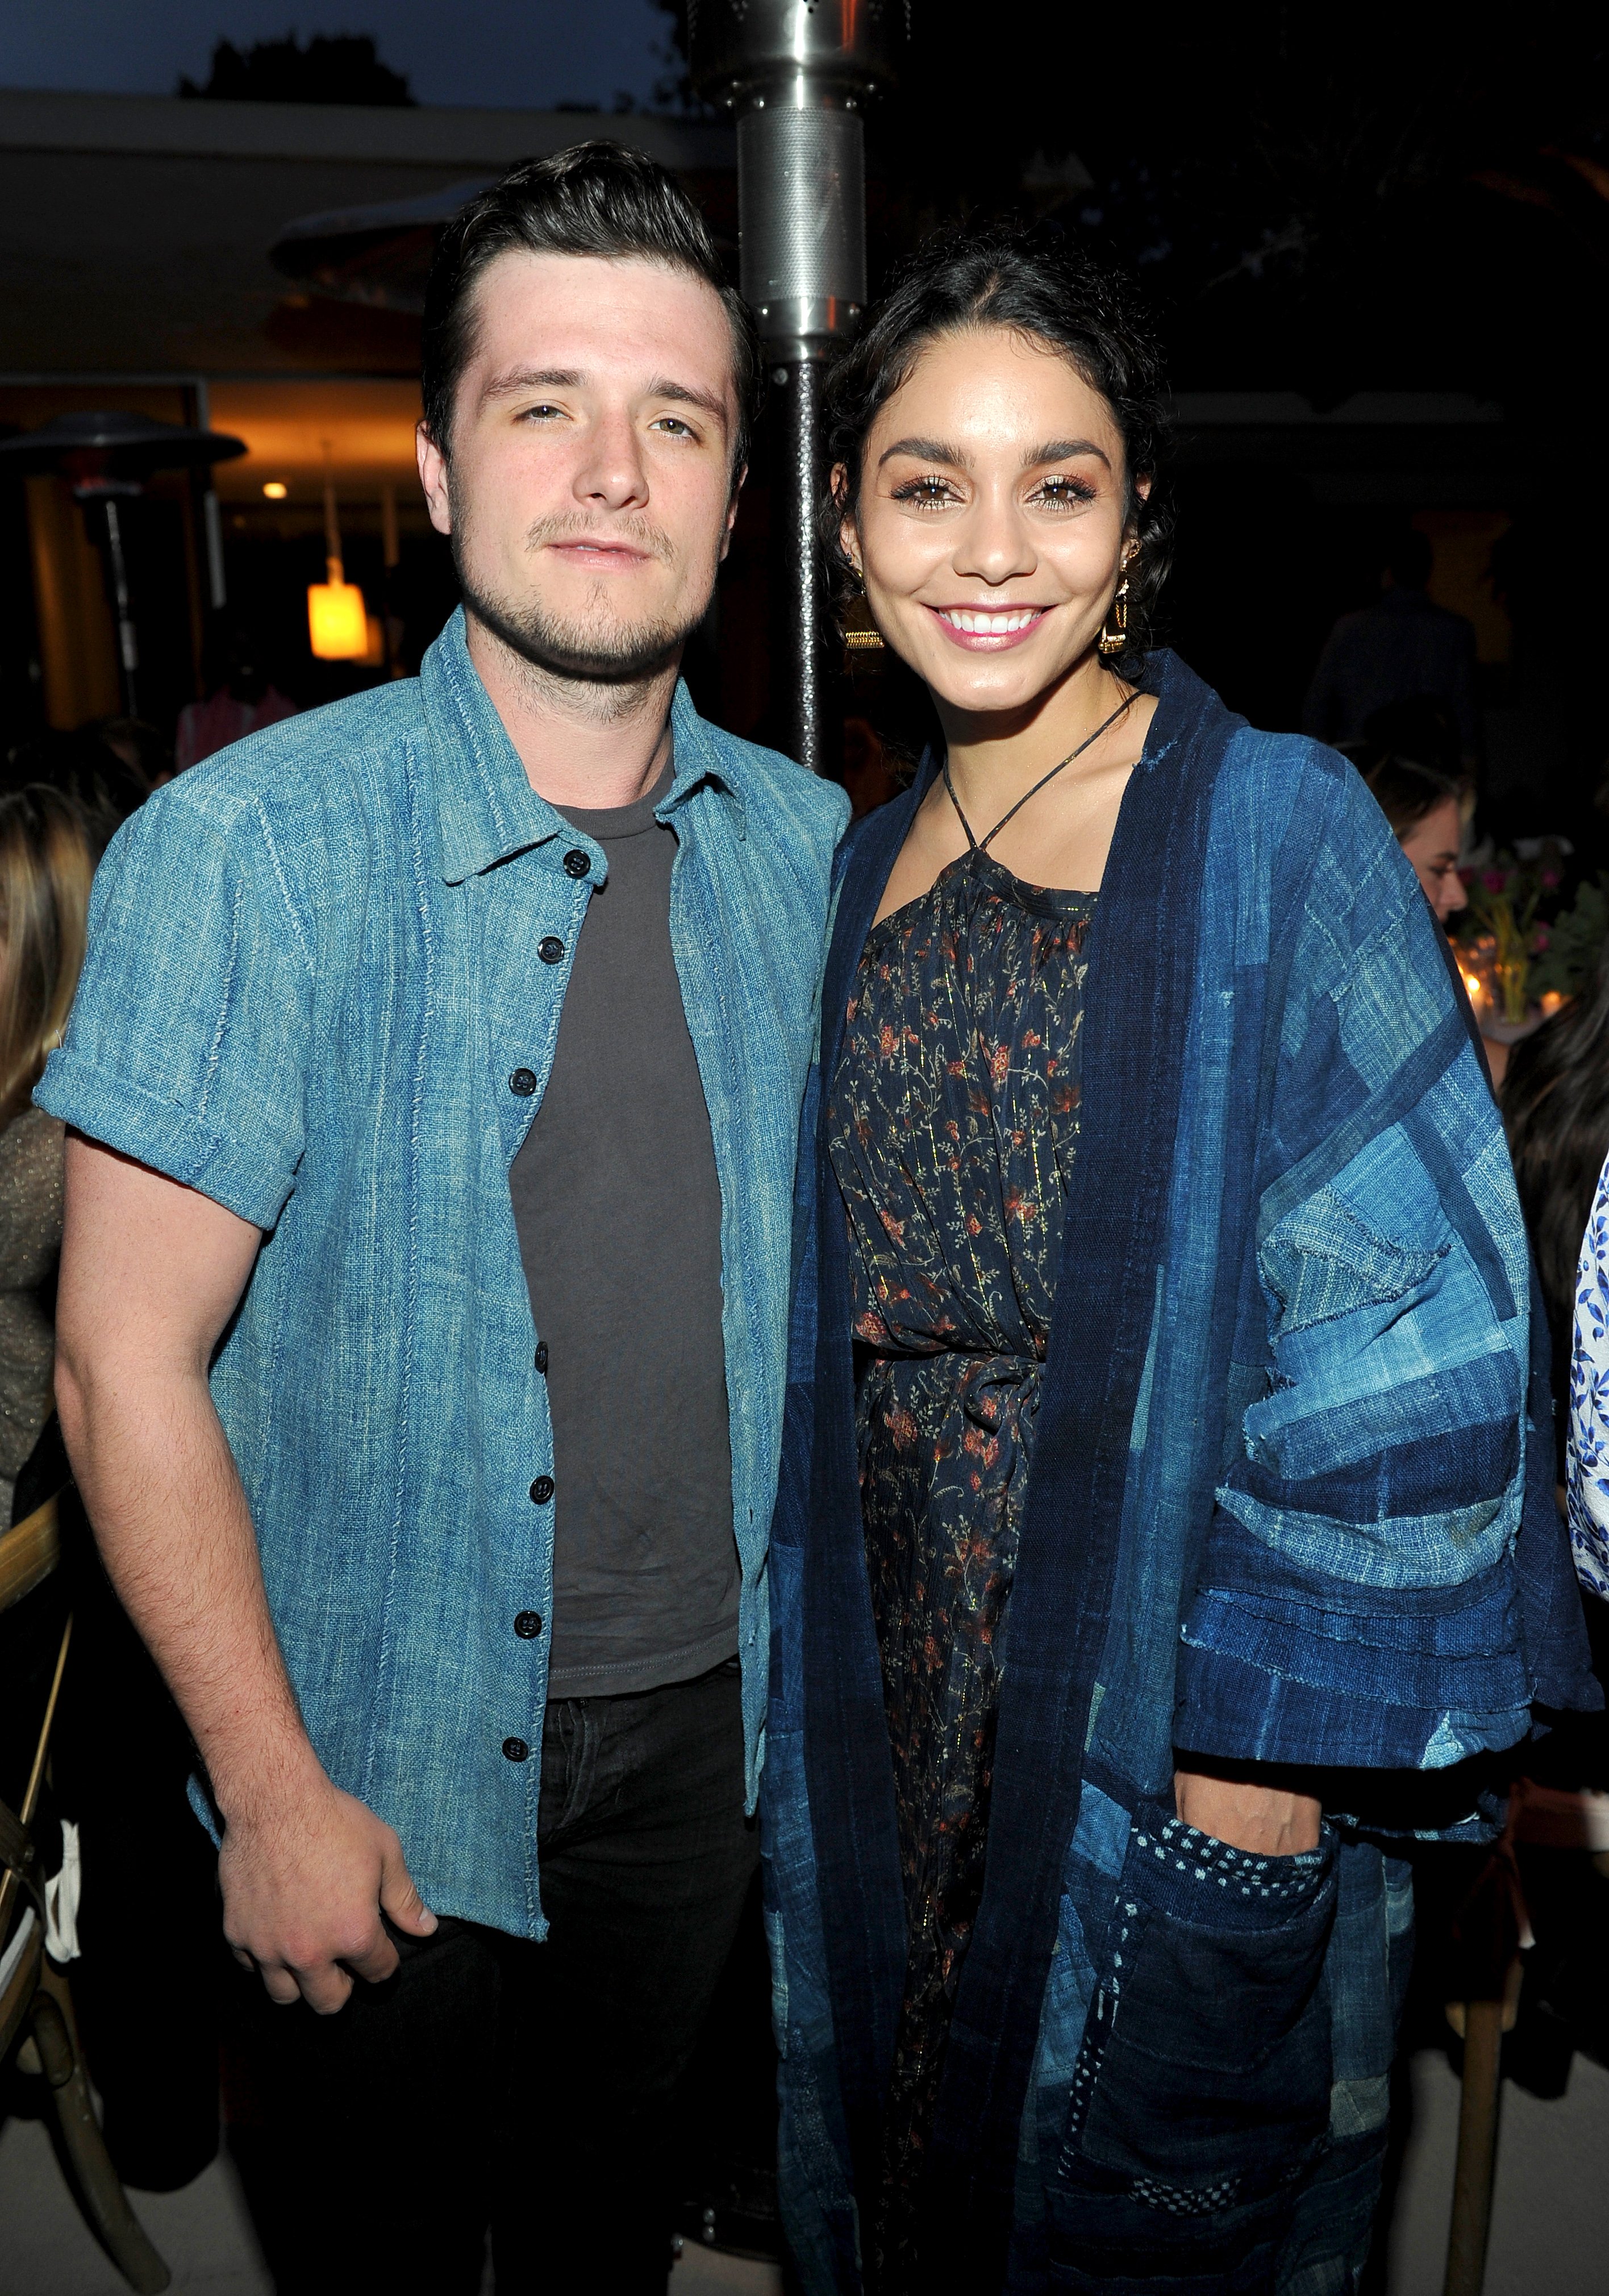 Josh Hutcherson and Vanessa Hudgens at a private residence on May 11, 2016, in Beverly Hills, California. | Source: Getty Images